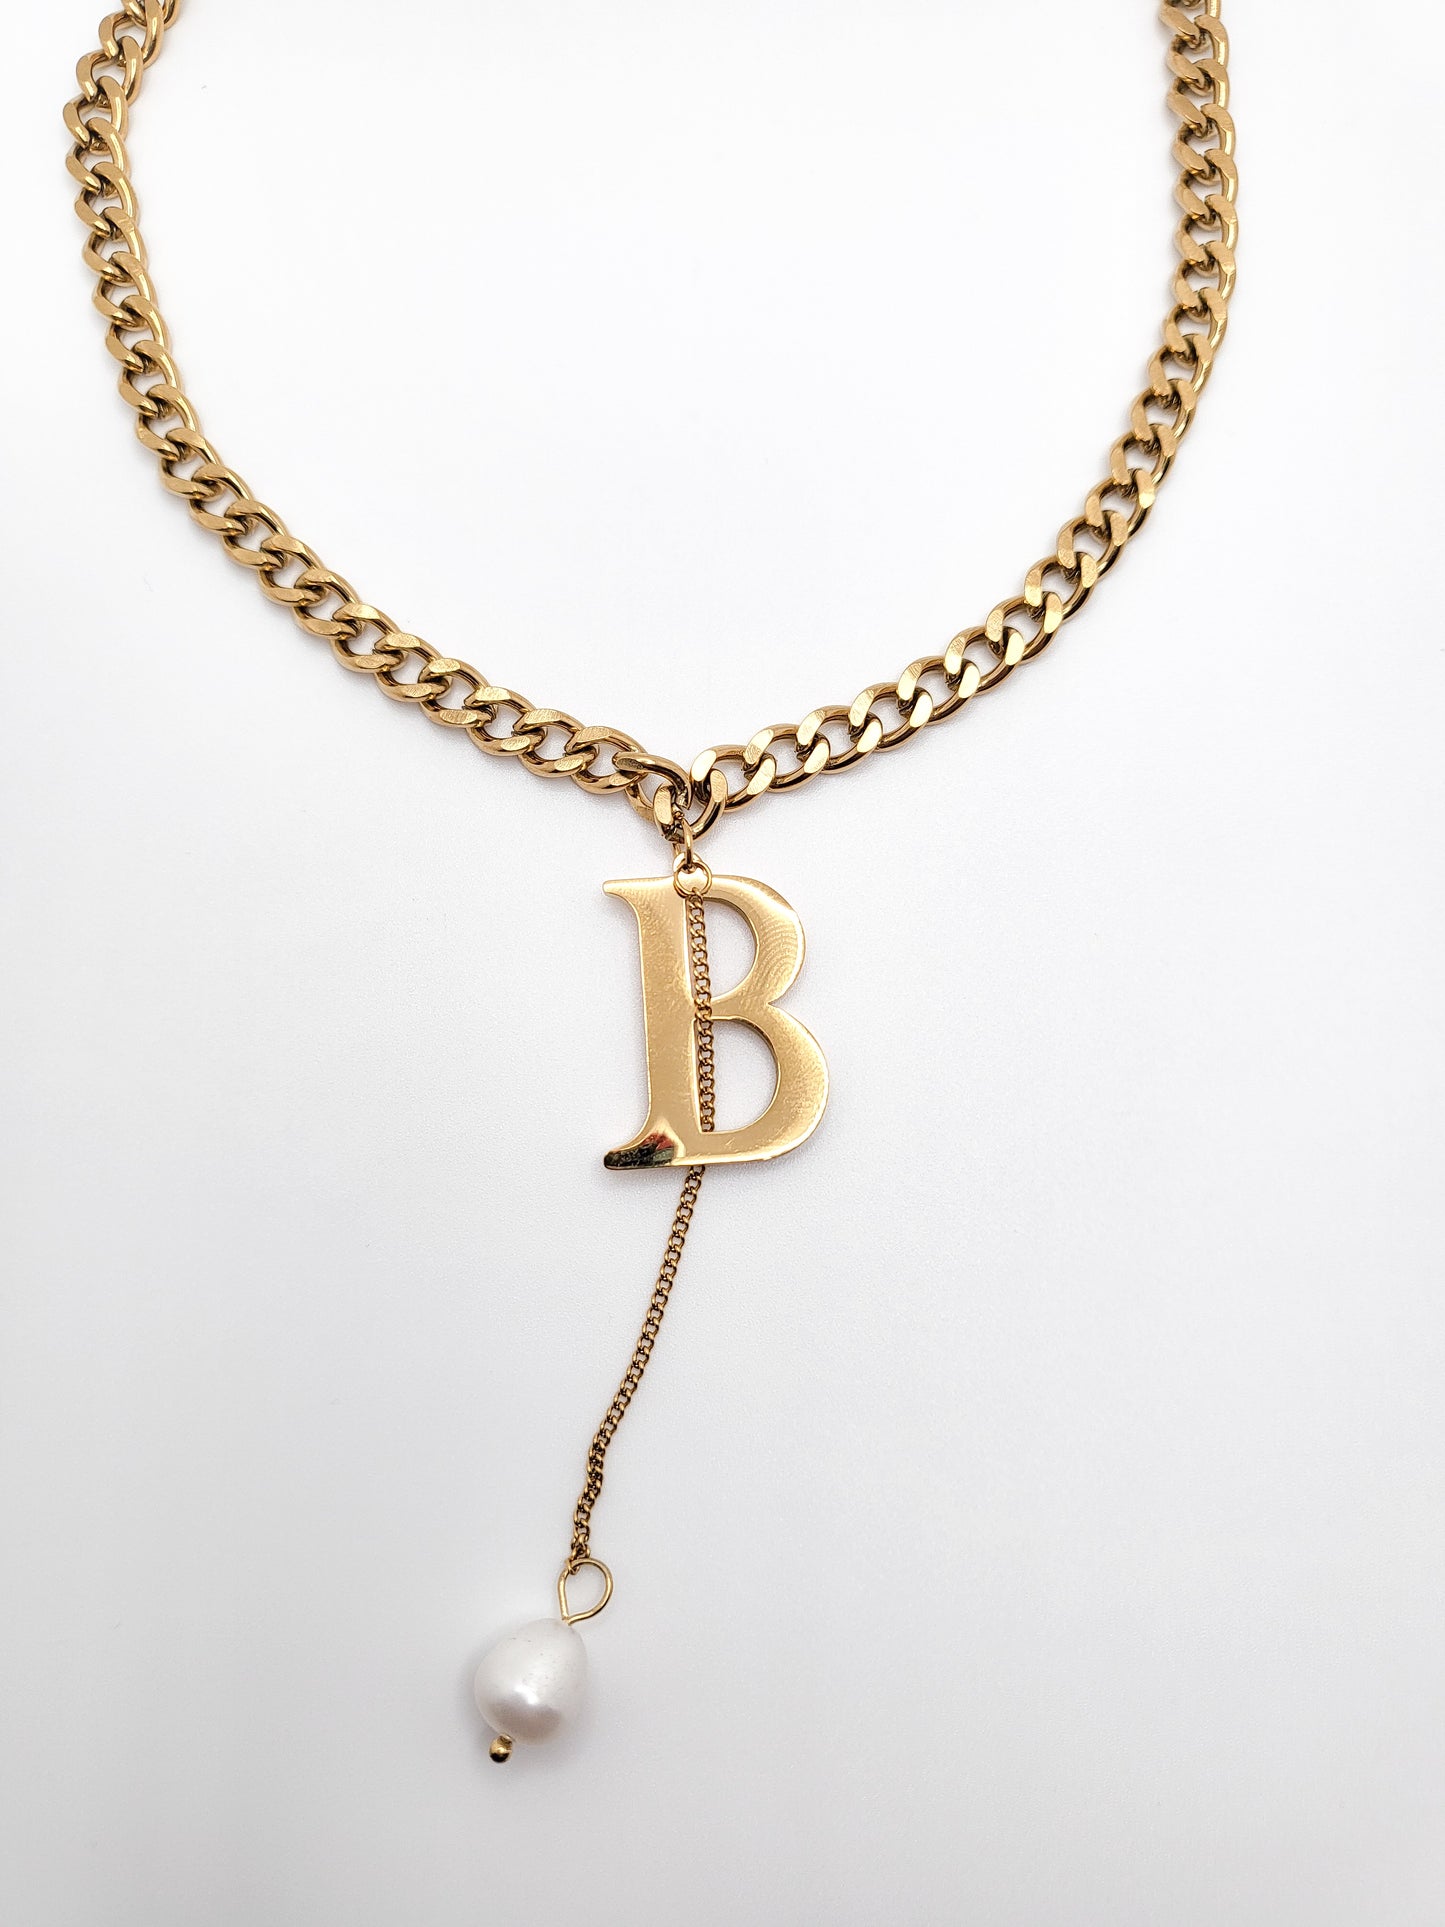 Gold plated b necklace with pearl